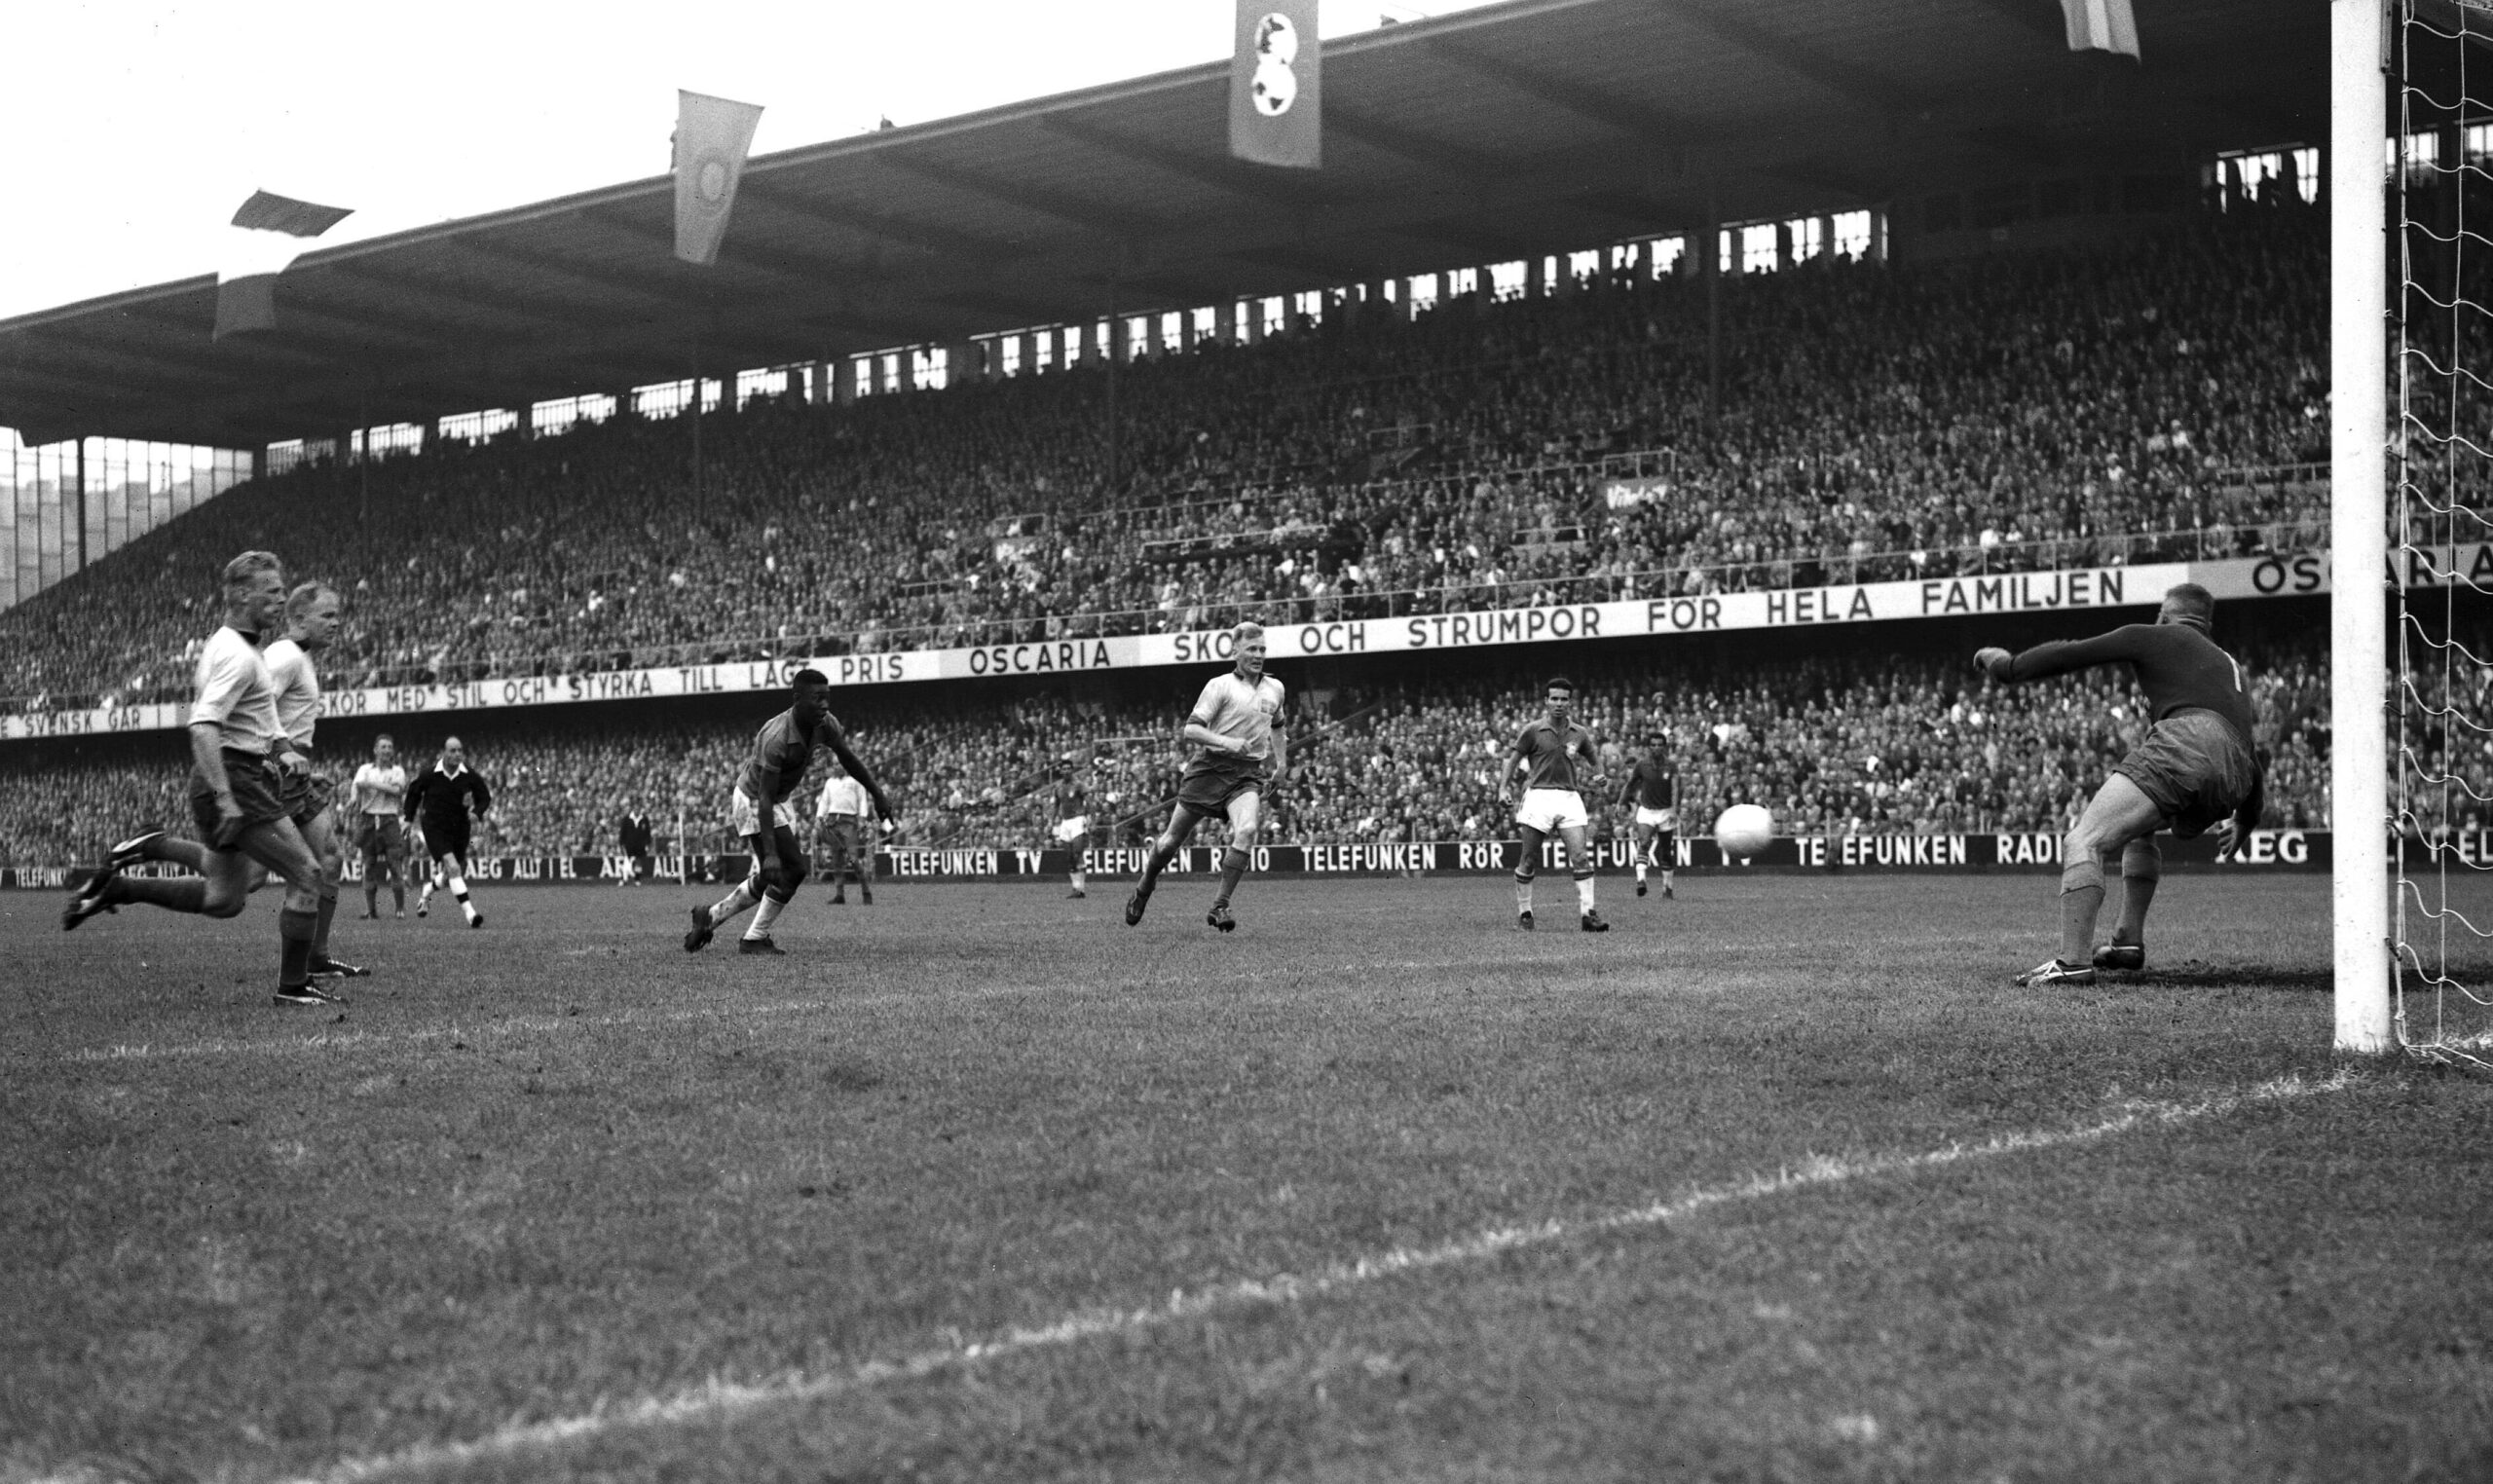 Image of Pele breakign free in the box to score during the World Cup final